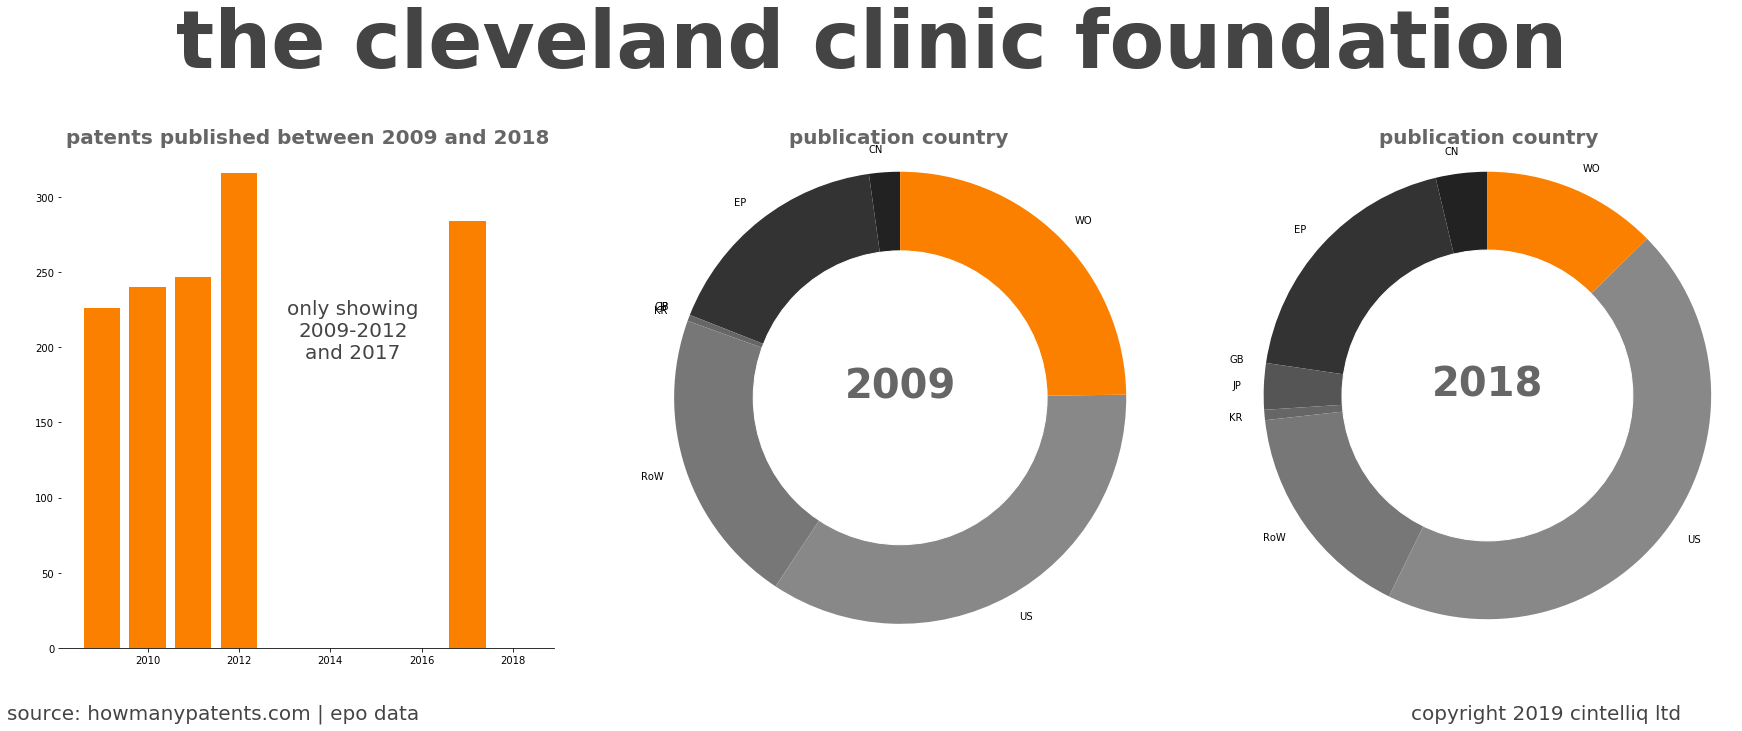 summary of patents for The Cleveland Clinic Foundation